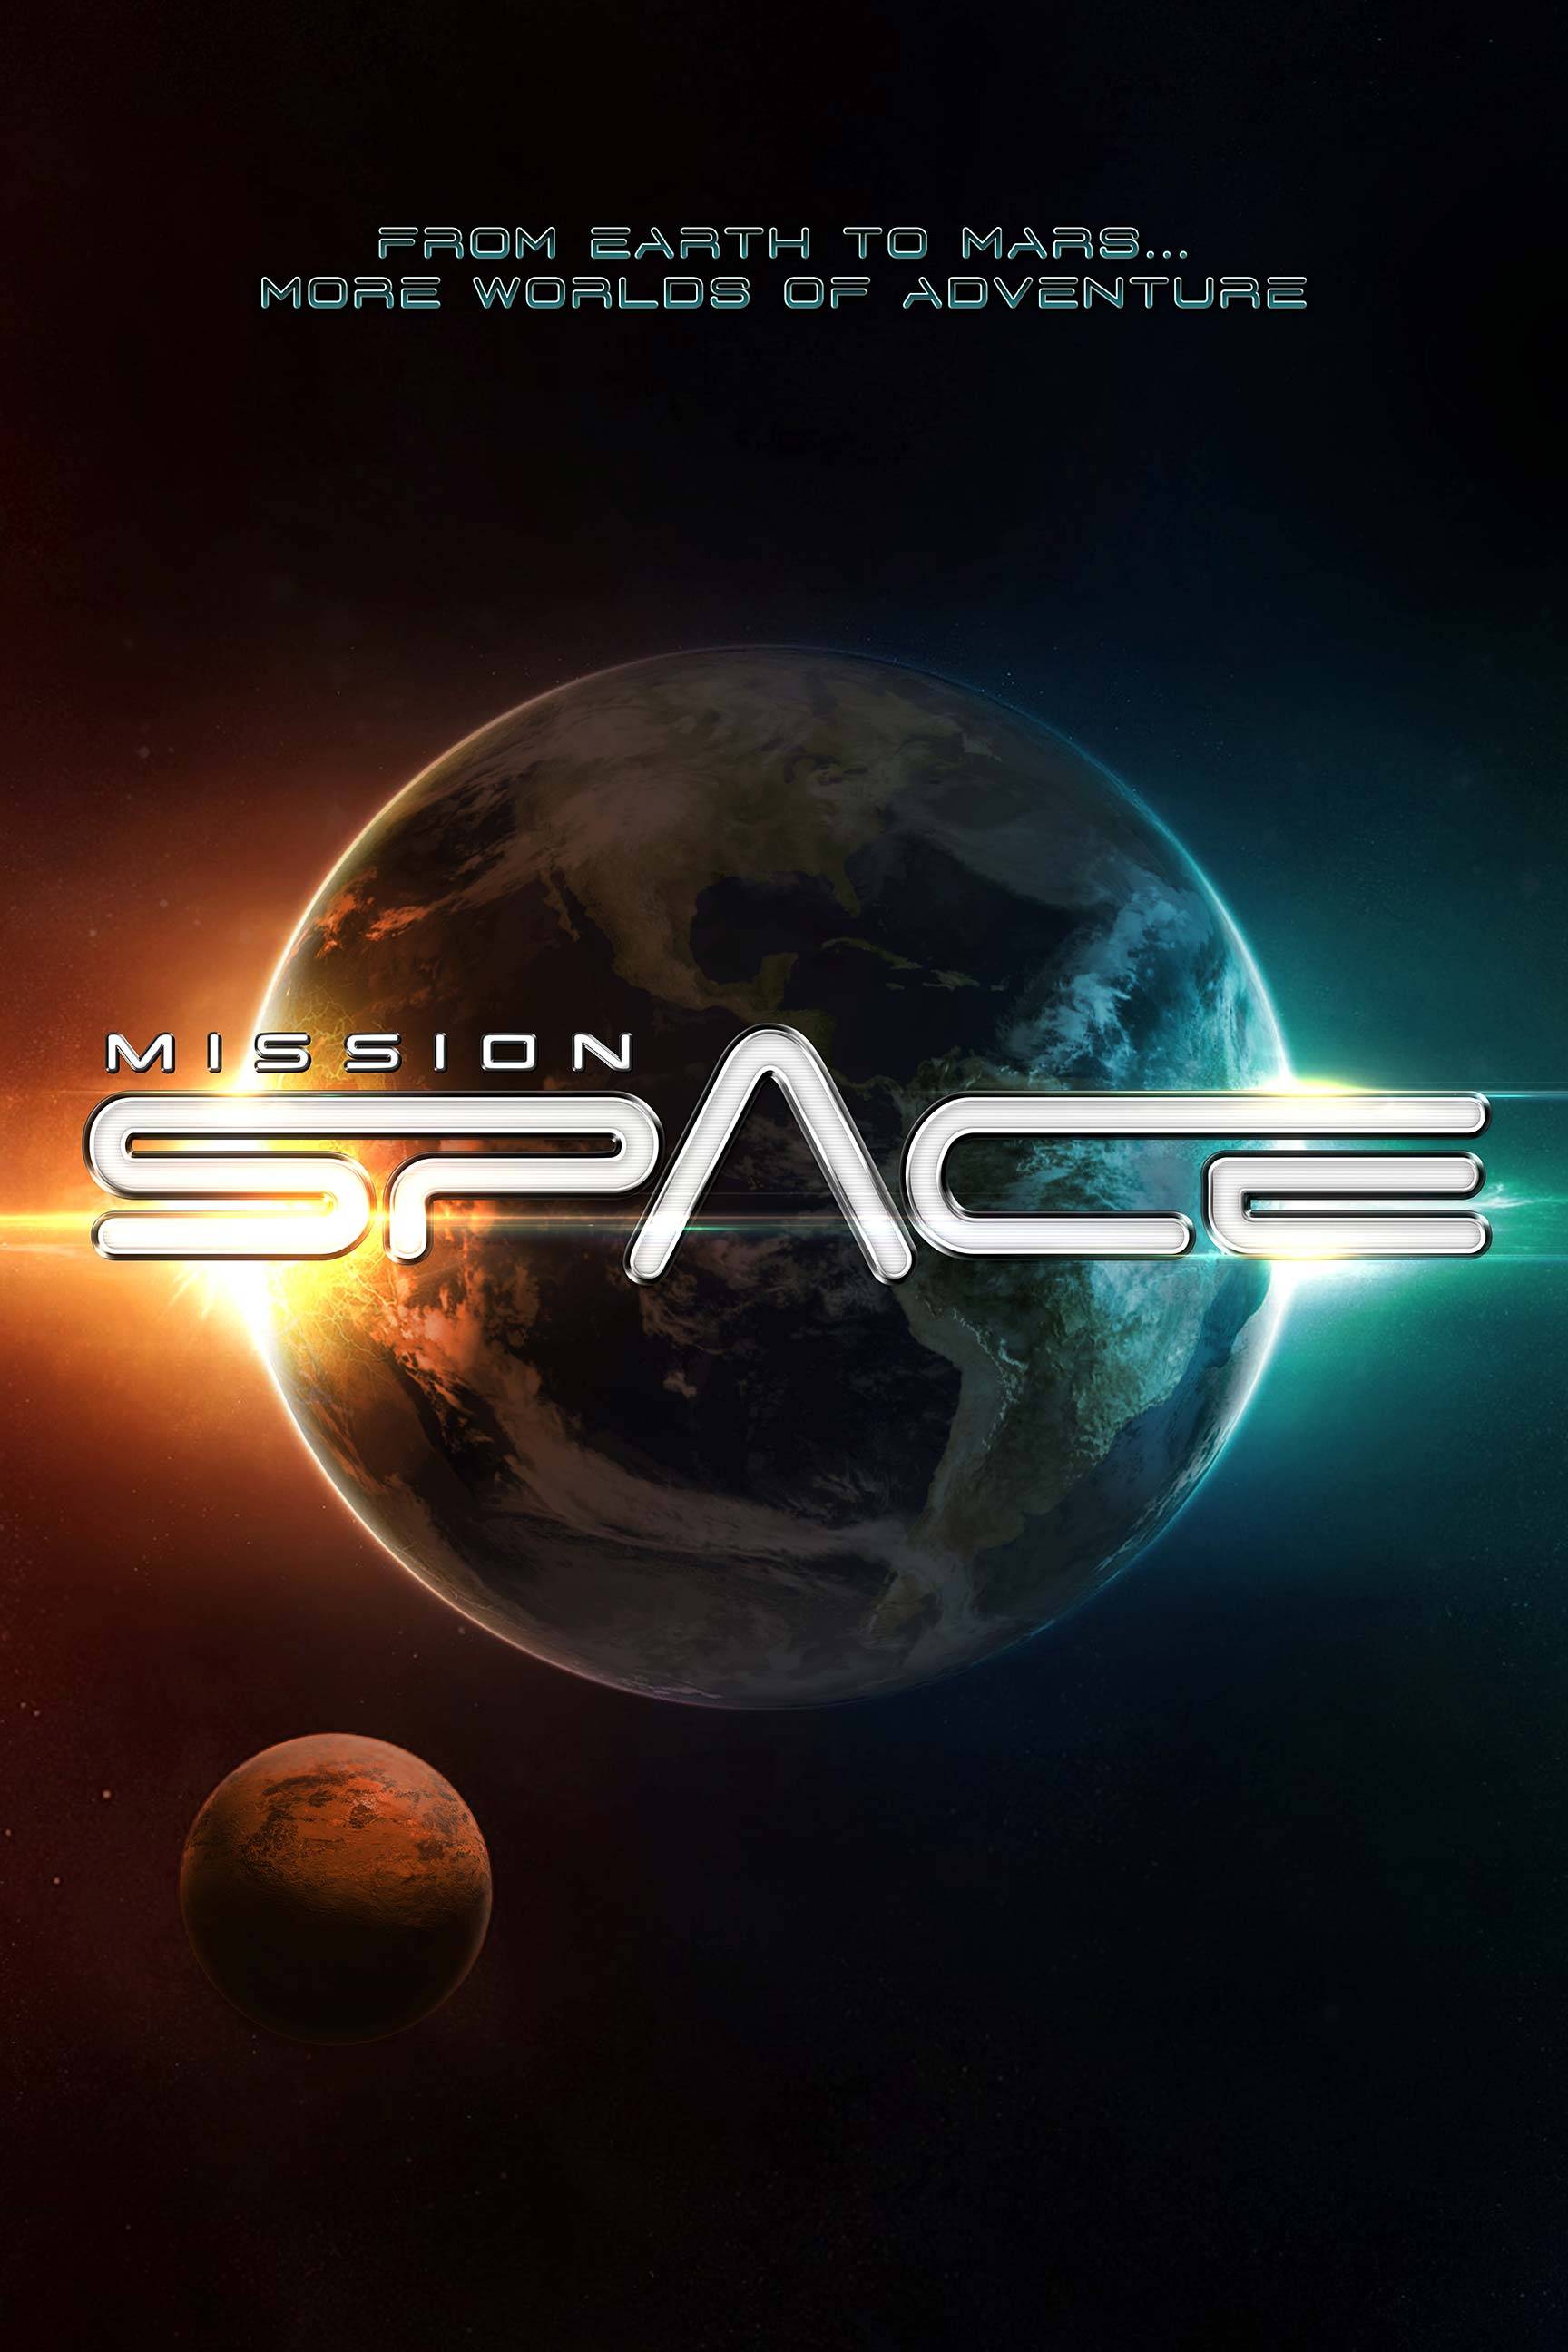 Misson SPACE overview